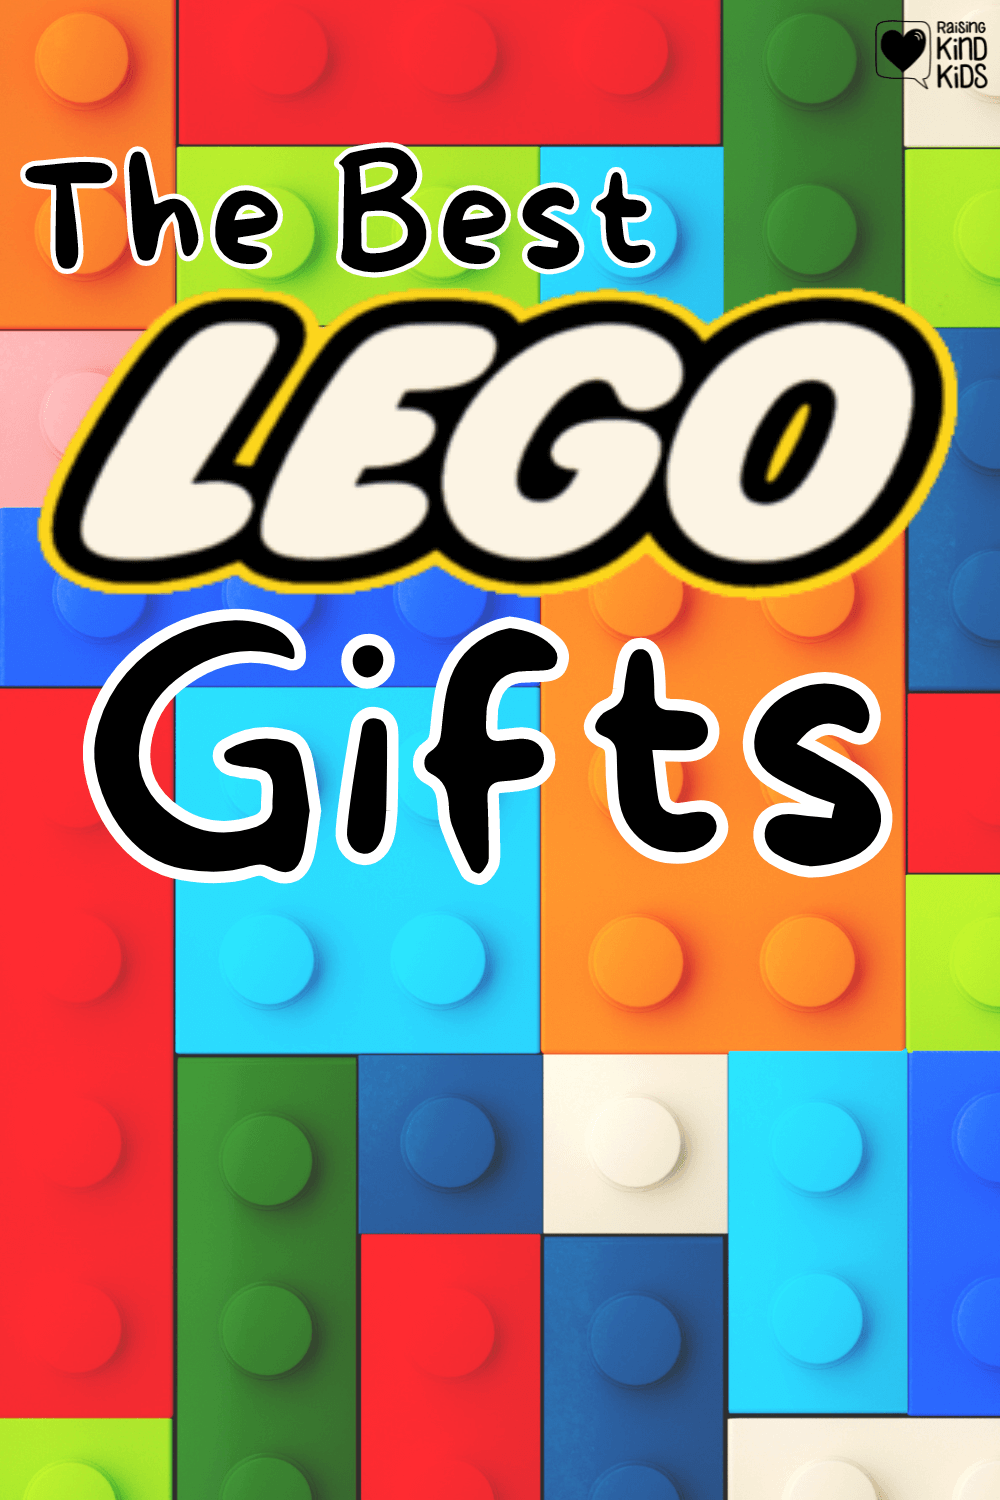 Have an ultimate lego lover in your life? This list of lego gifts is perfect for lego lovers #lego #legobuilders #legogifts #legoholidaygifts #legos #coffeeandcarpool #holidaygiftguides